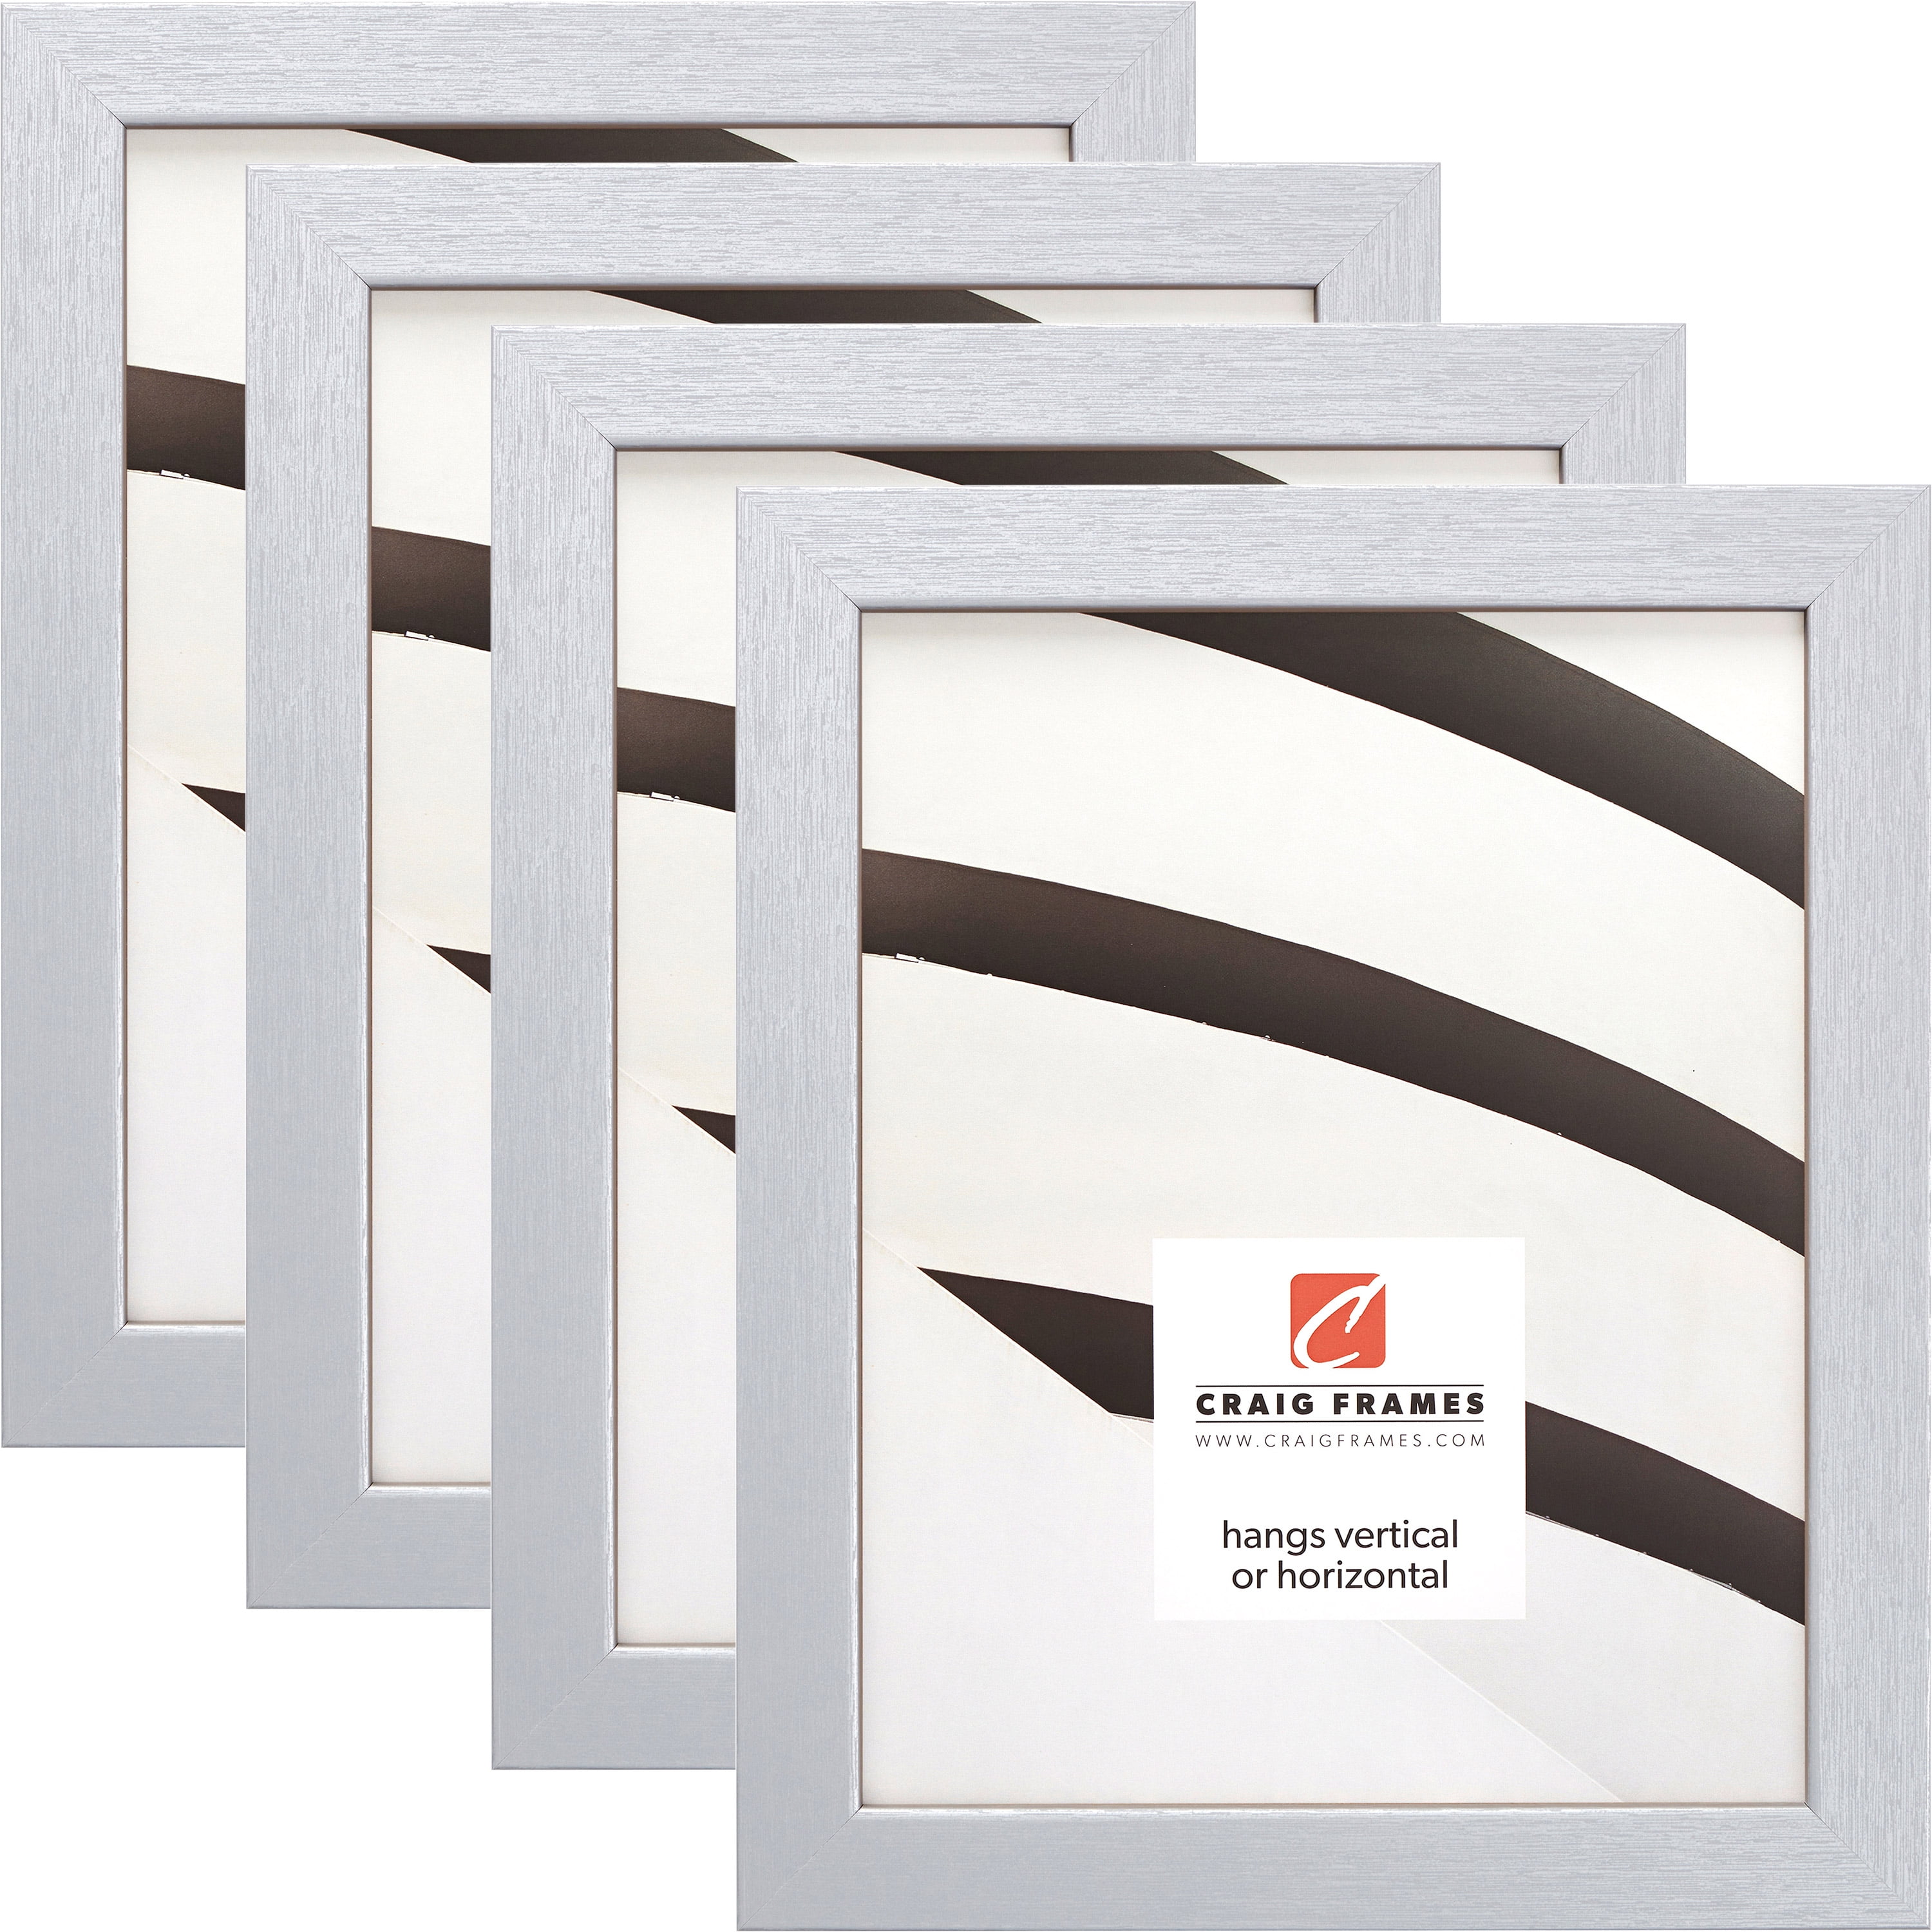 Details about   4Pck 8.5x11 Picture Diploma Certificate Document Frames with White Mats Black 